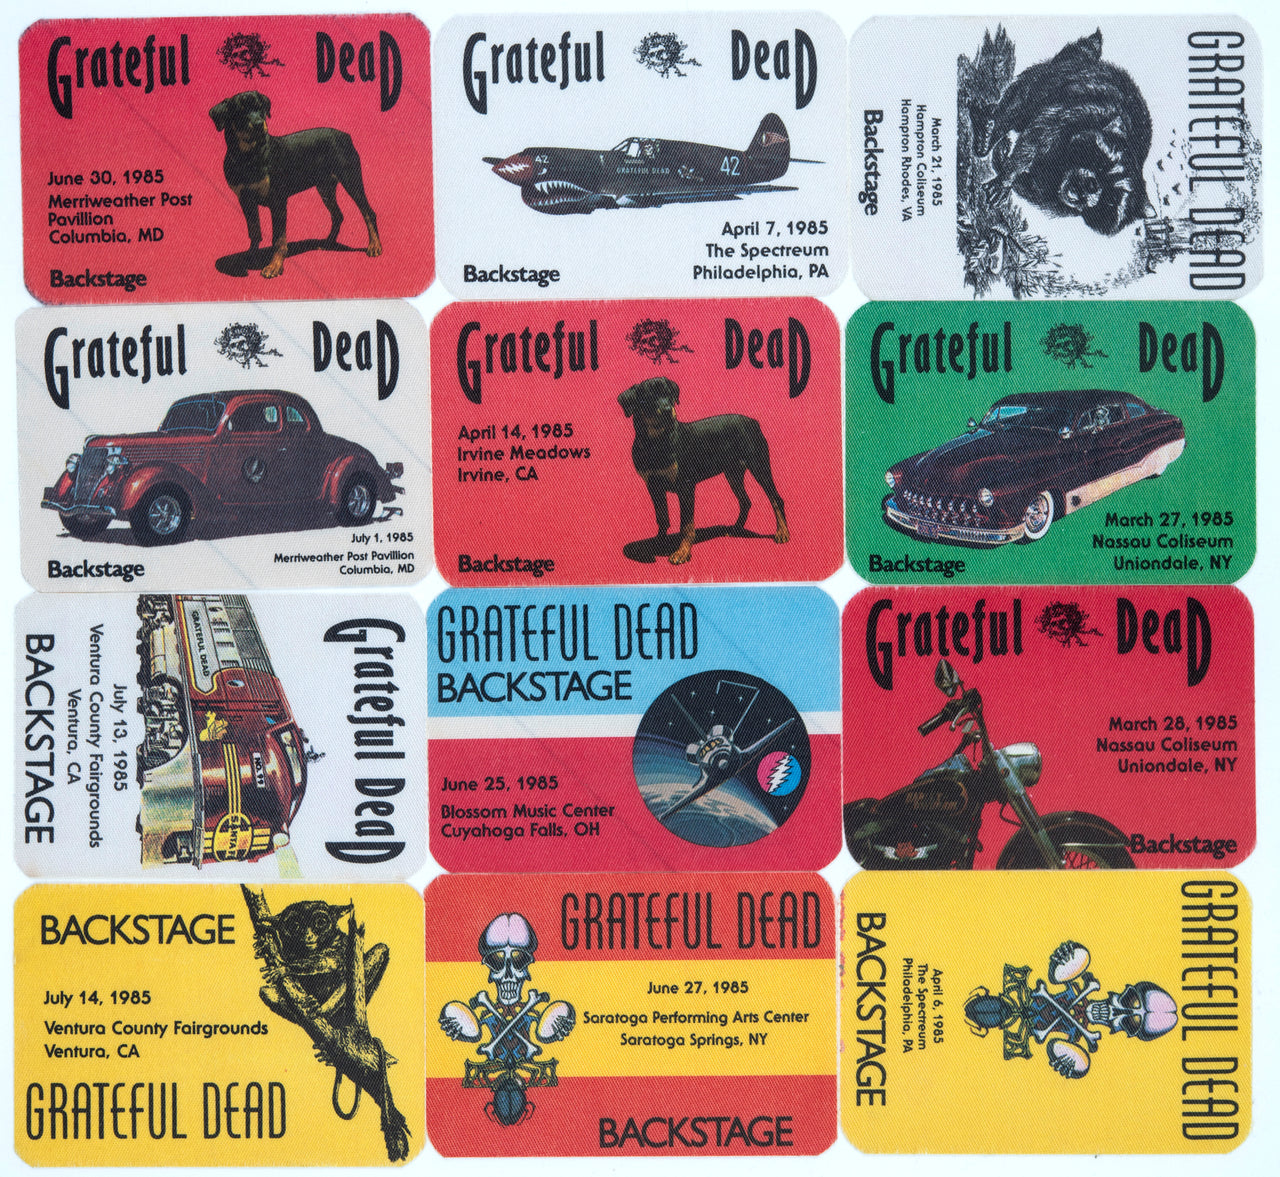 Grateful Dead Backstage Passes (3/21/1985 - 7/14/1985) from Dan Healy